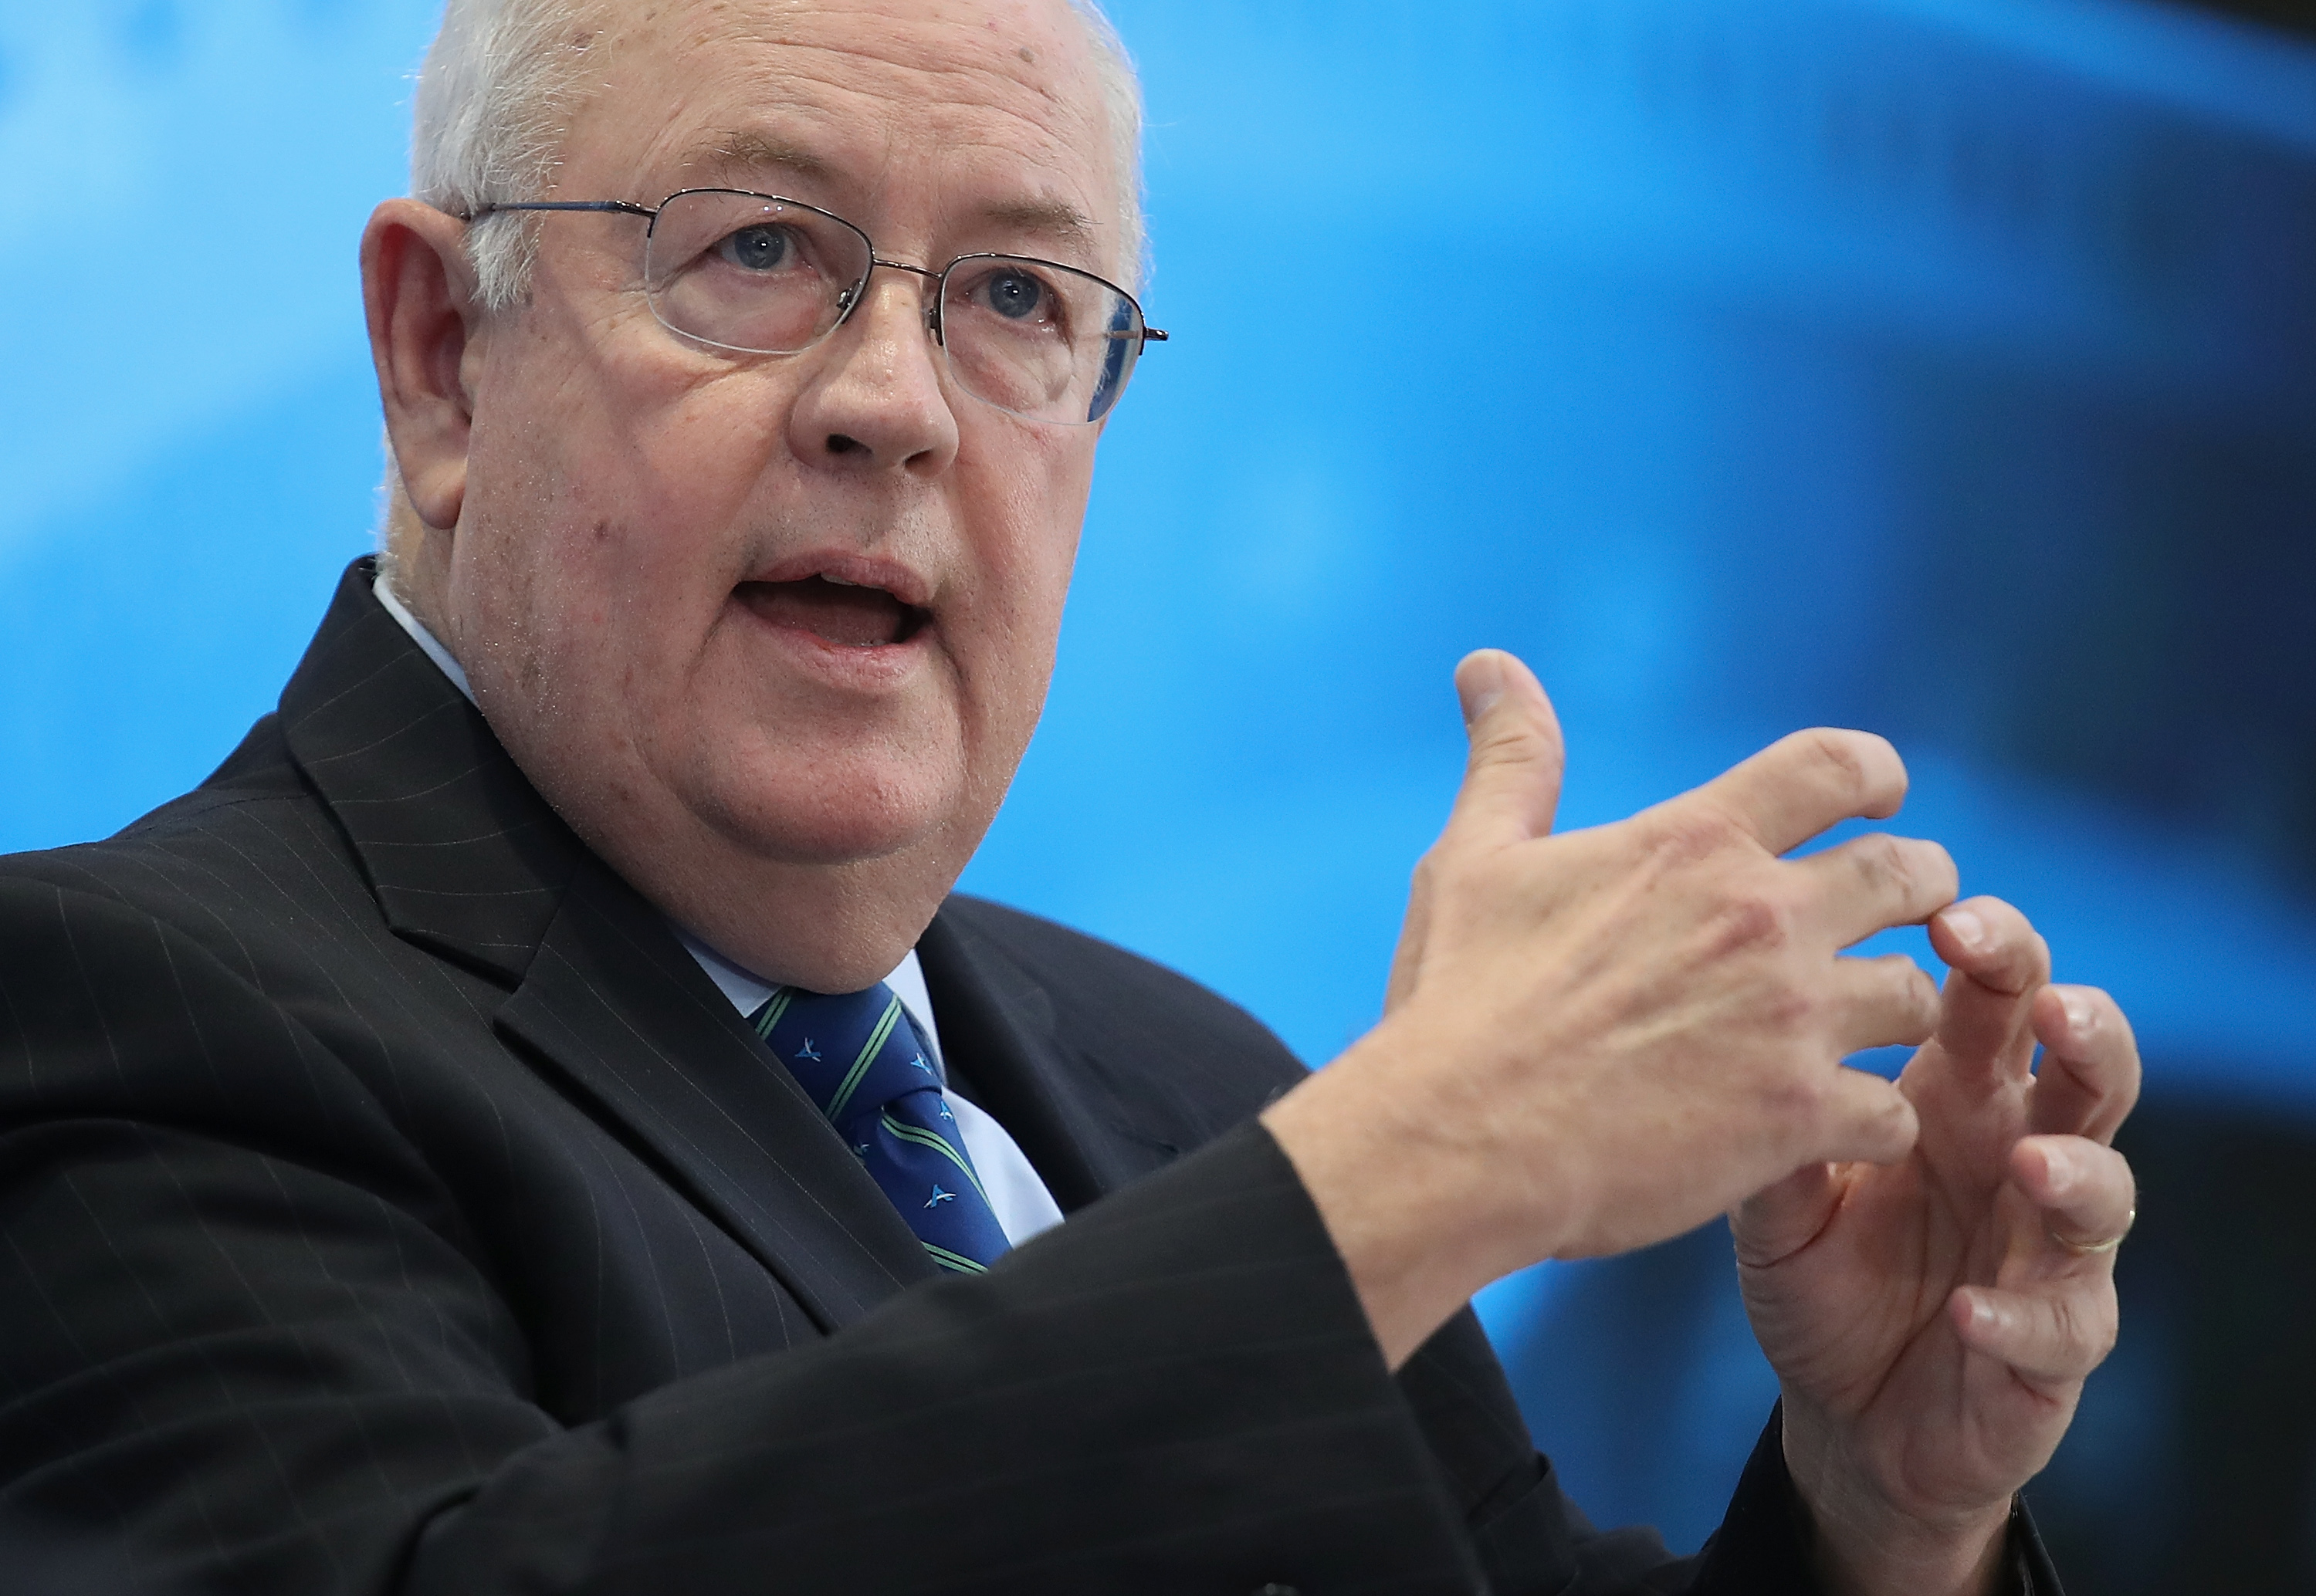 Former Independent Counsel Ken Starr answers questions during a discussion held at the American Enterprise Institute September 18, 2018 in Washington, DC. (Win McNamee/Getty Images)